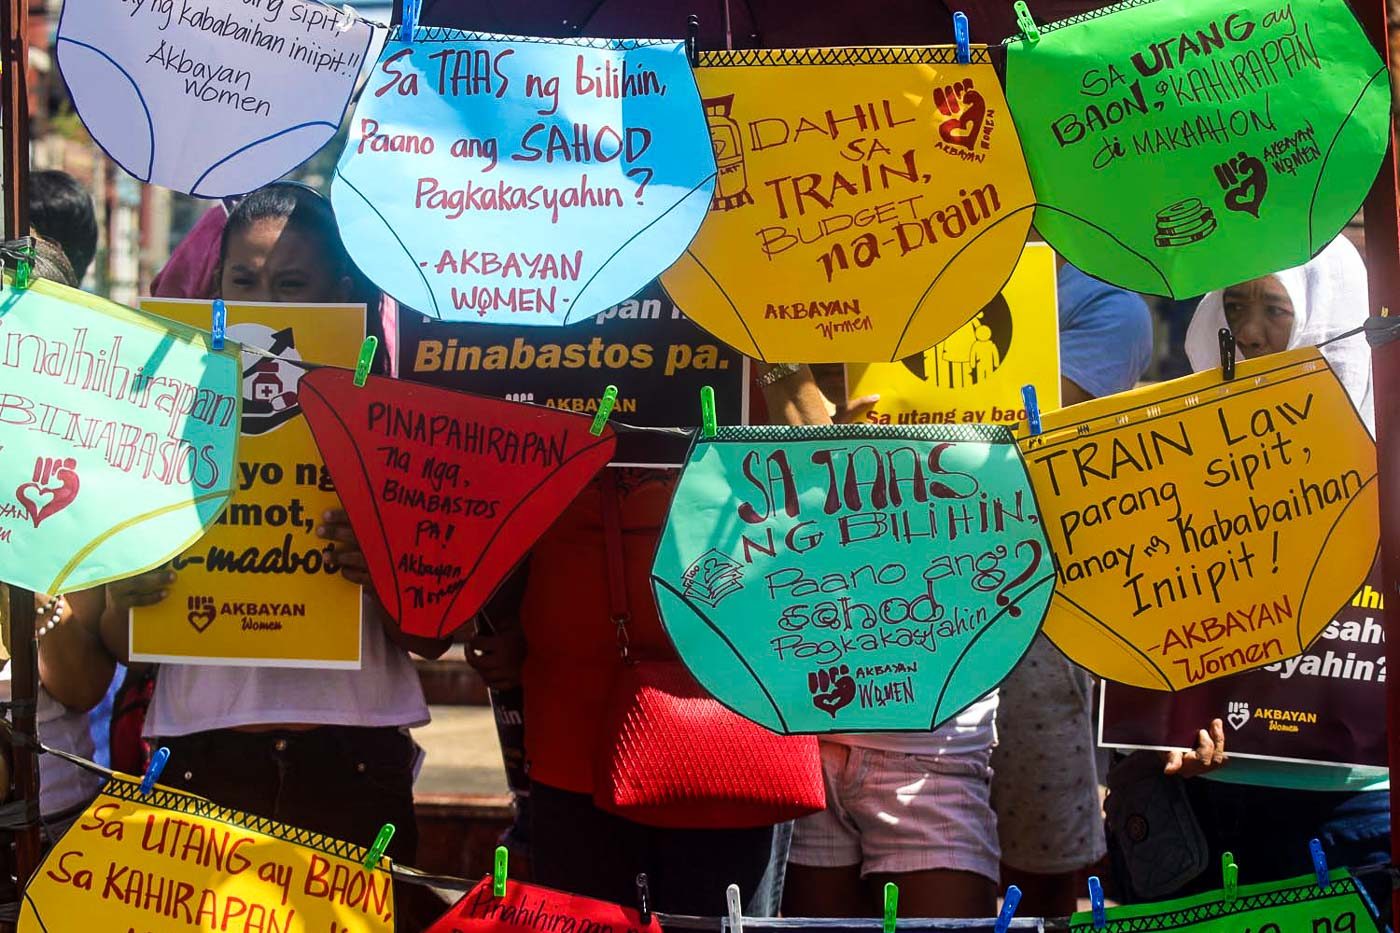 PANTY PROTEST. Members of Akbayan women hold a symbolic 'panty protest' at the Boy Scout Circle in Quezon City on March 23, 2018, highlighting issues of misogyny and the rising prices of commodities due to the TRAIN Law. Photo by Darren Langit/Rappler 